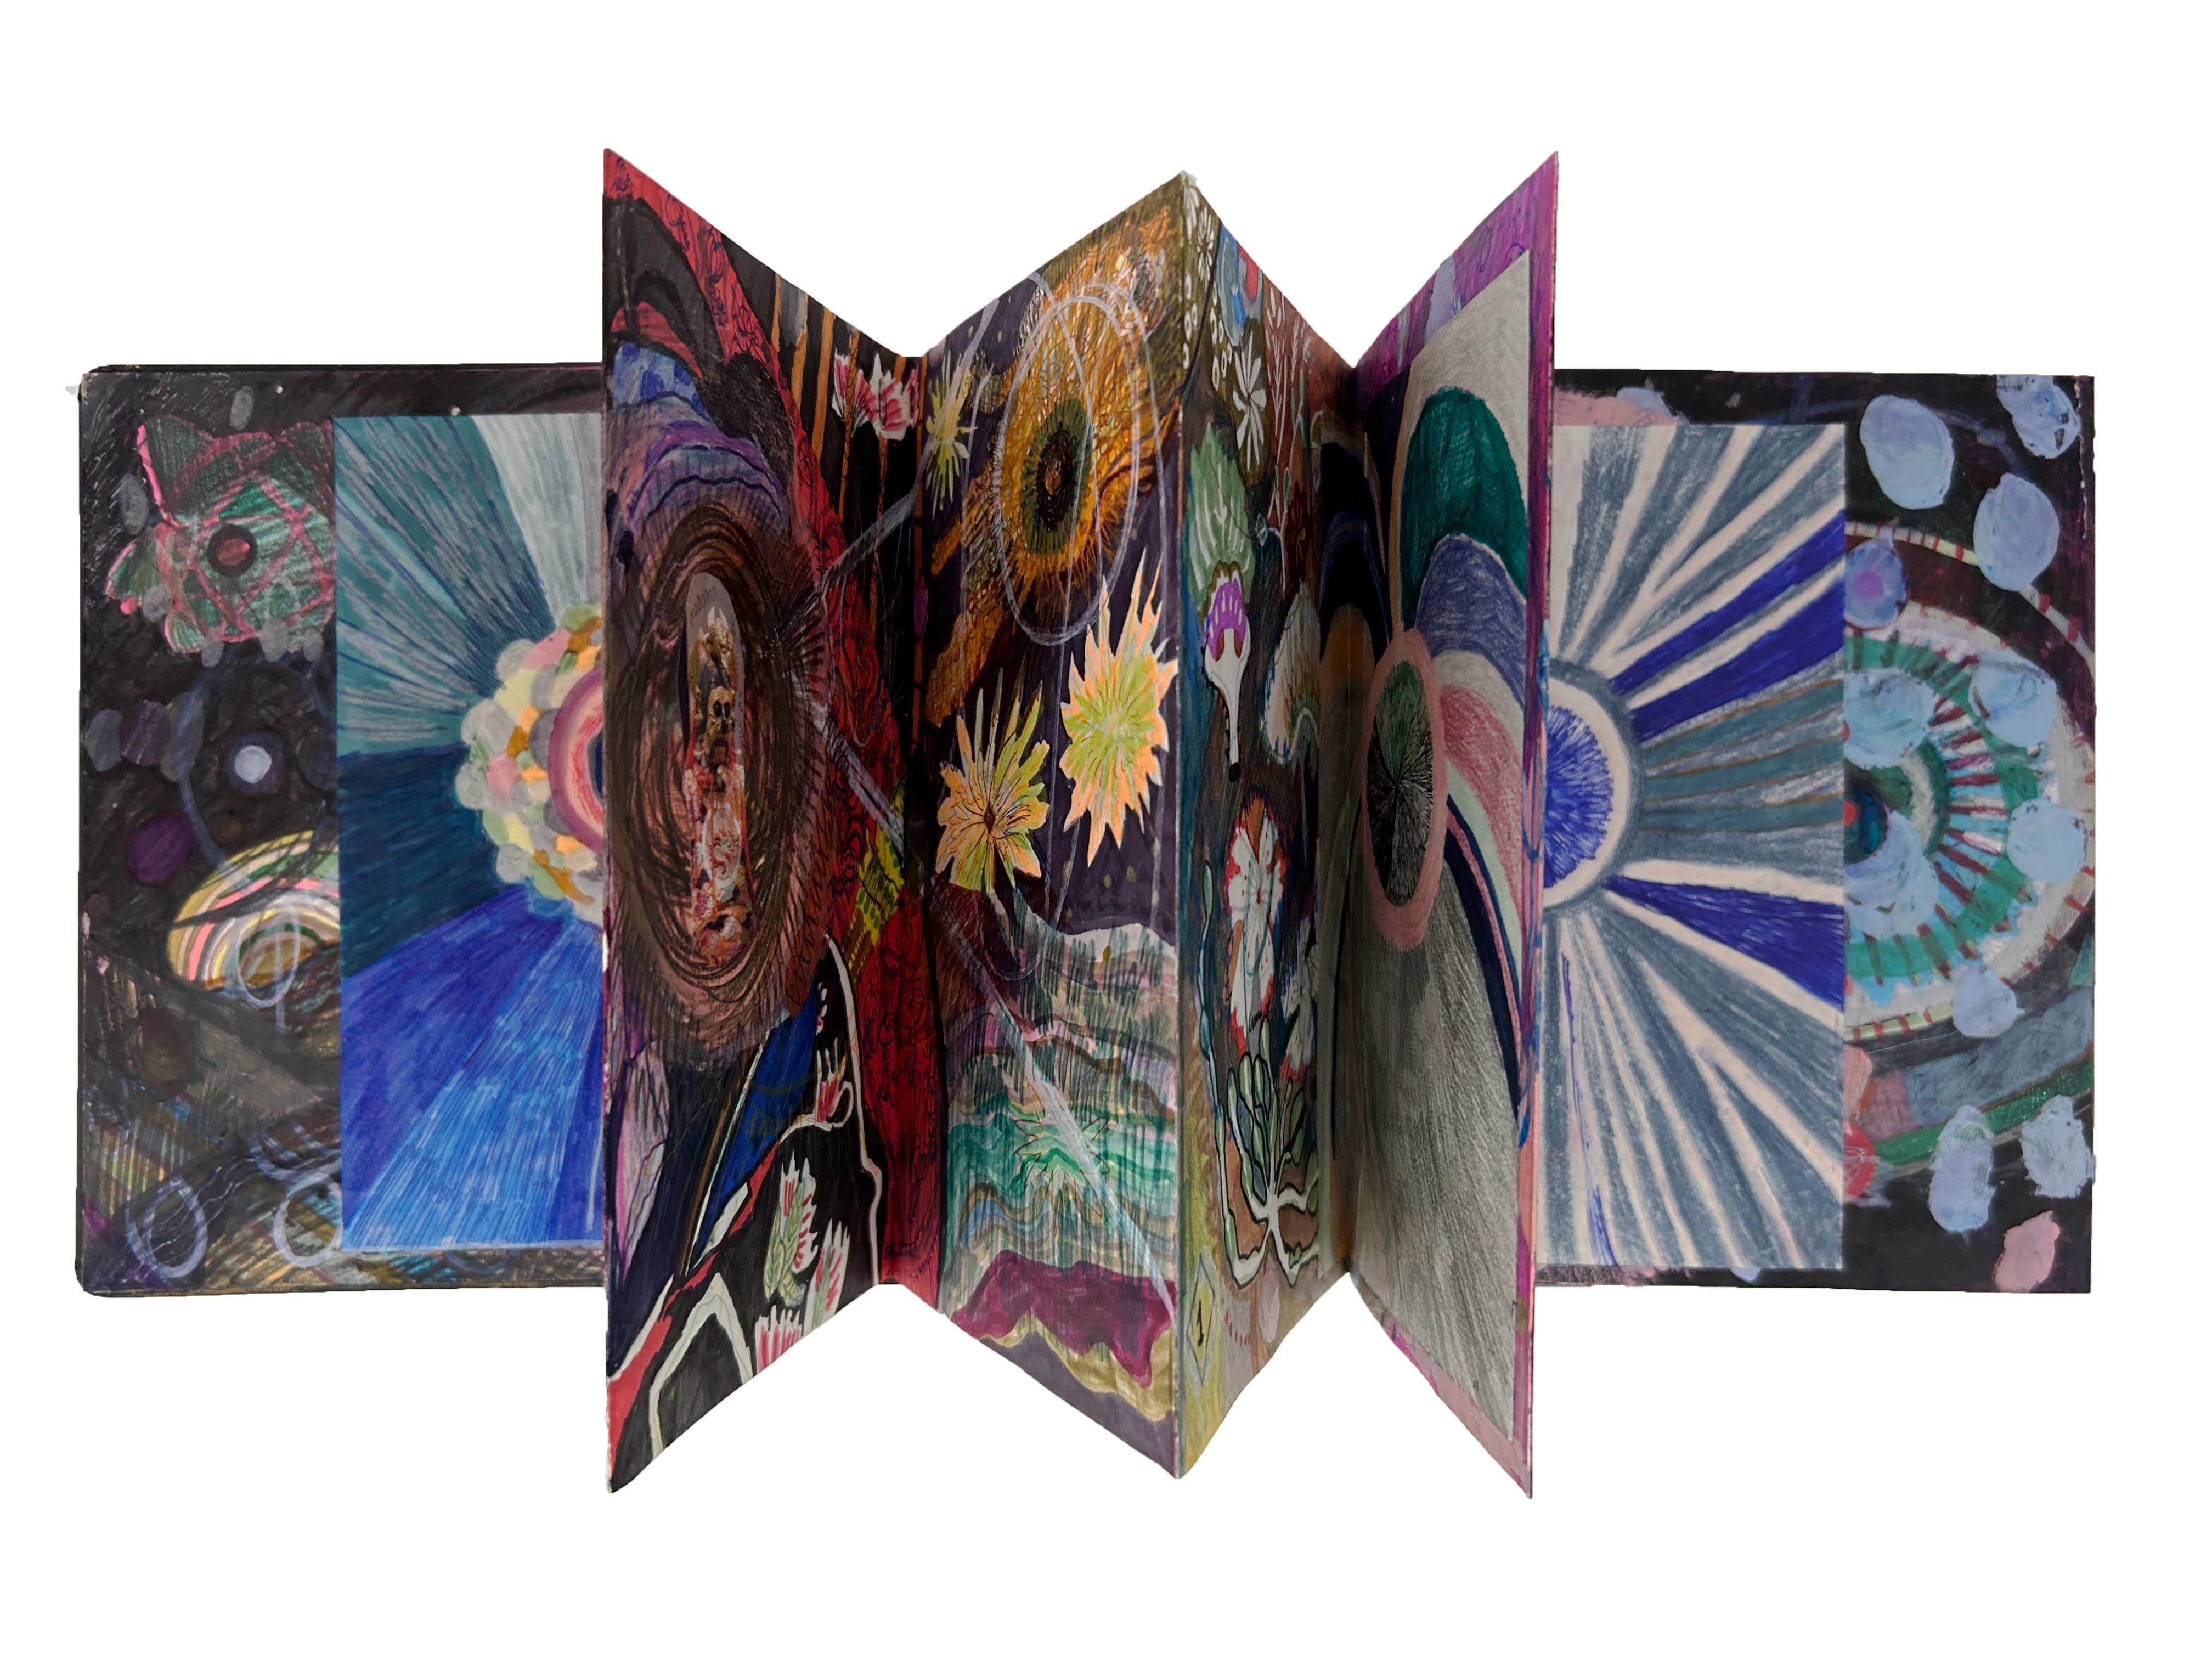 "Cuaderno íntimo" contemporary, double sided artist book, collage drawings  - Mixed Media Art by Yanieb Fabre